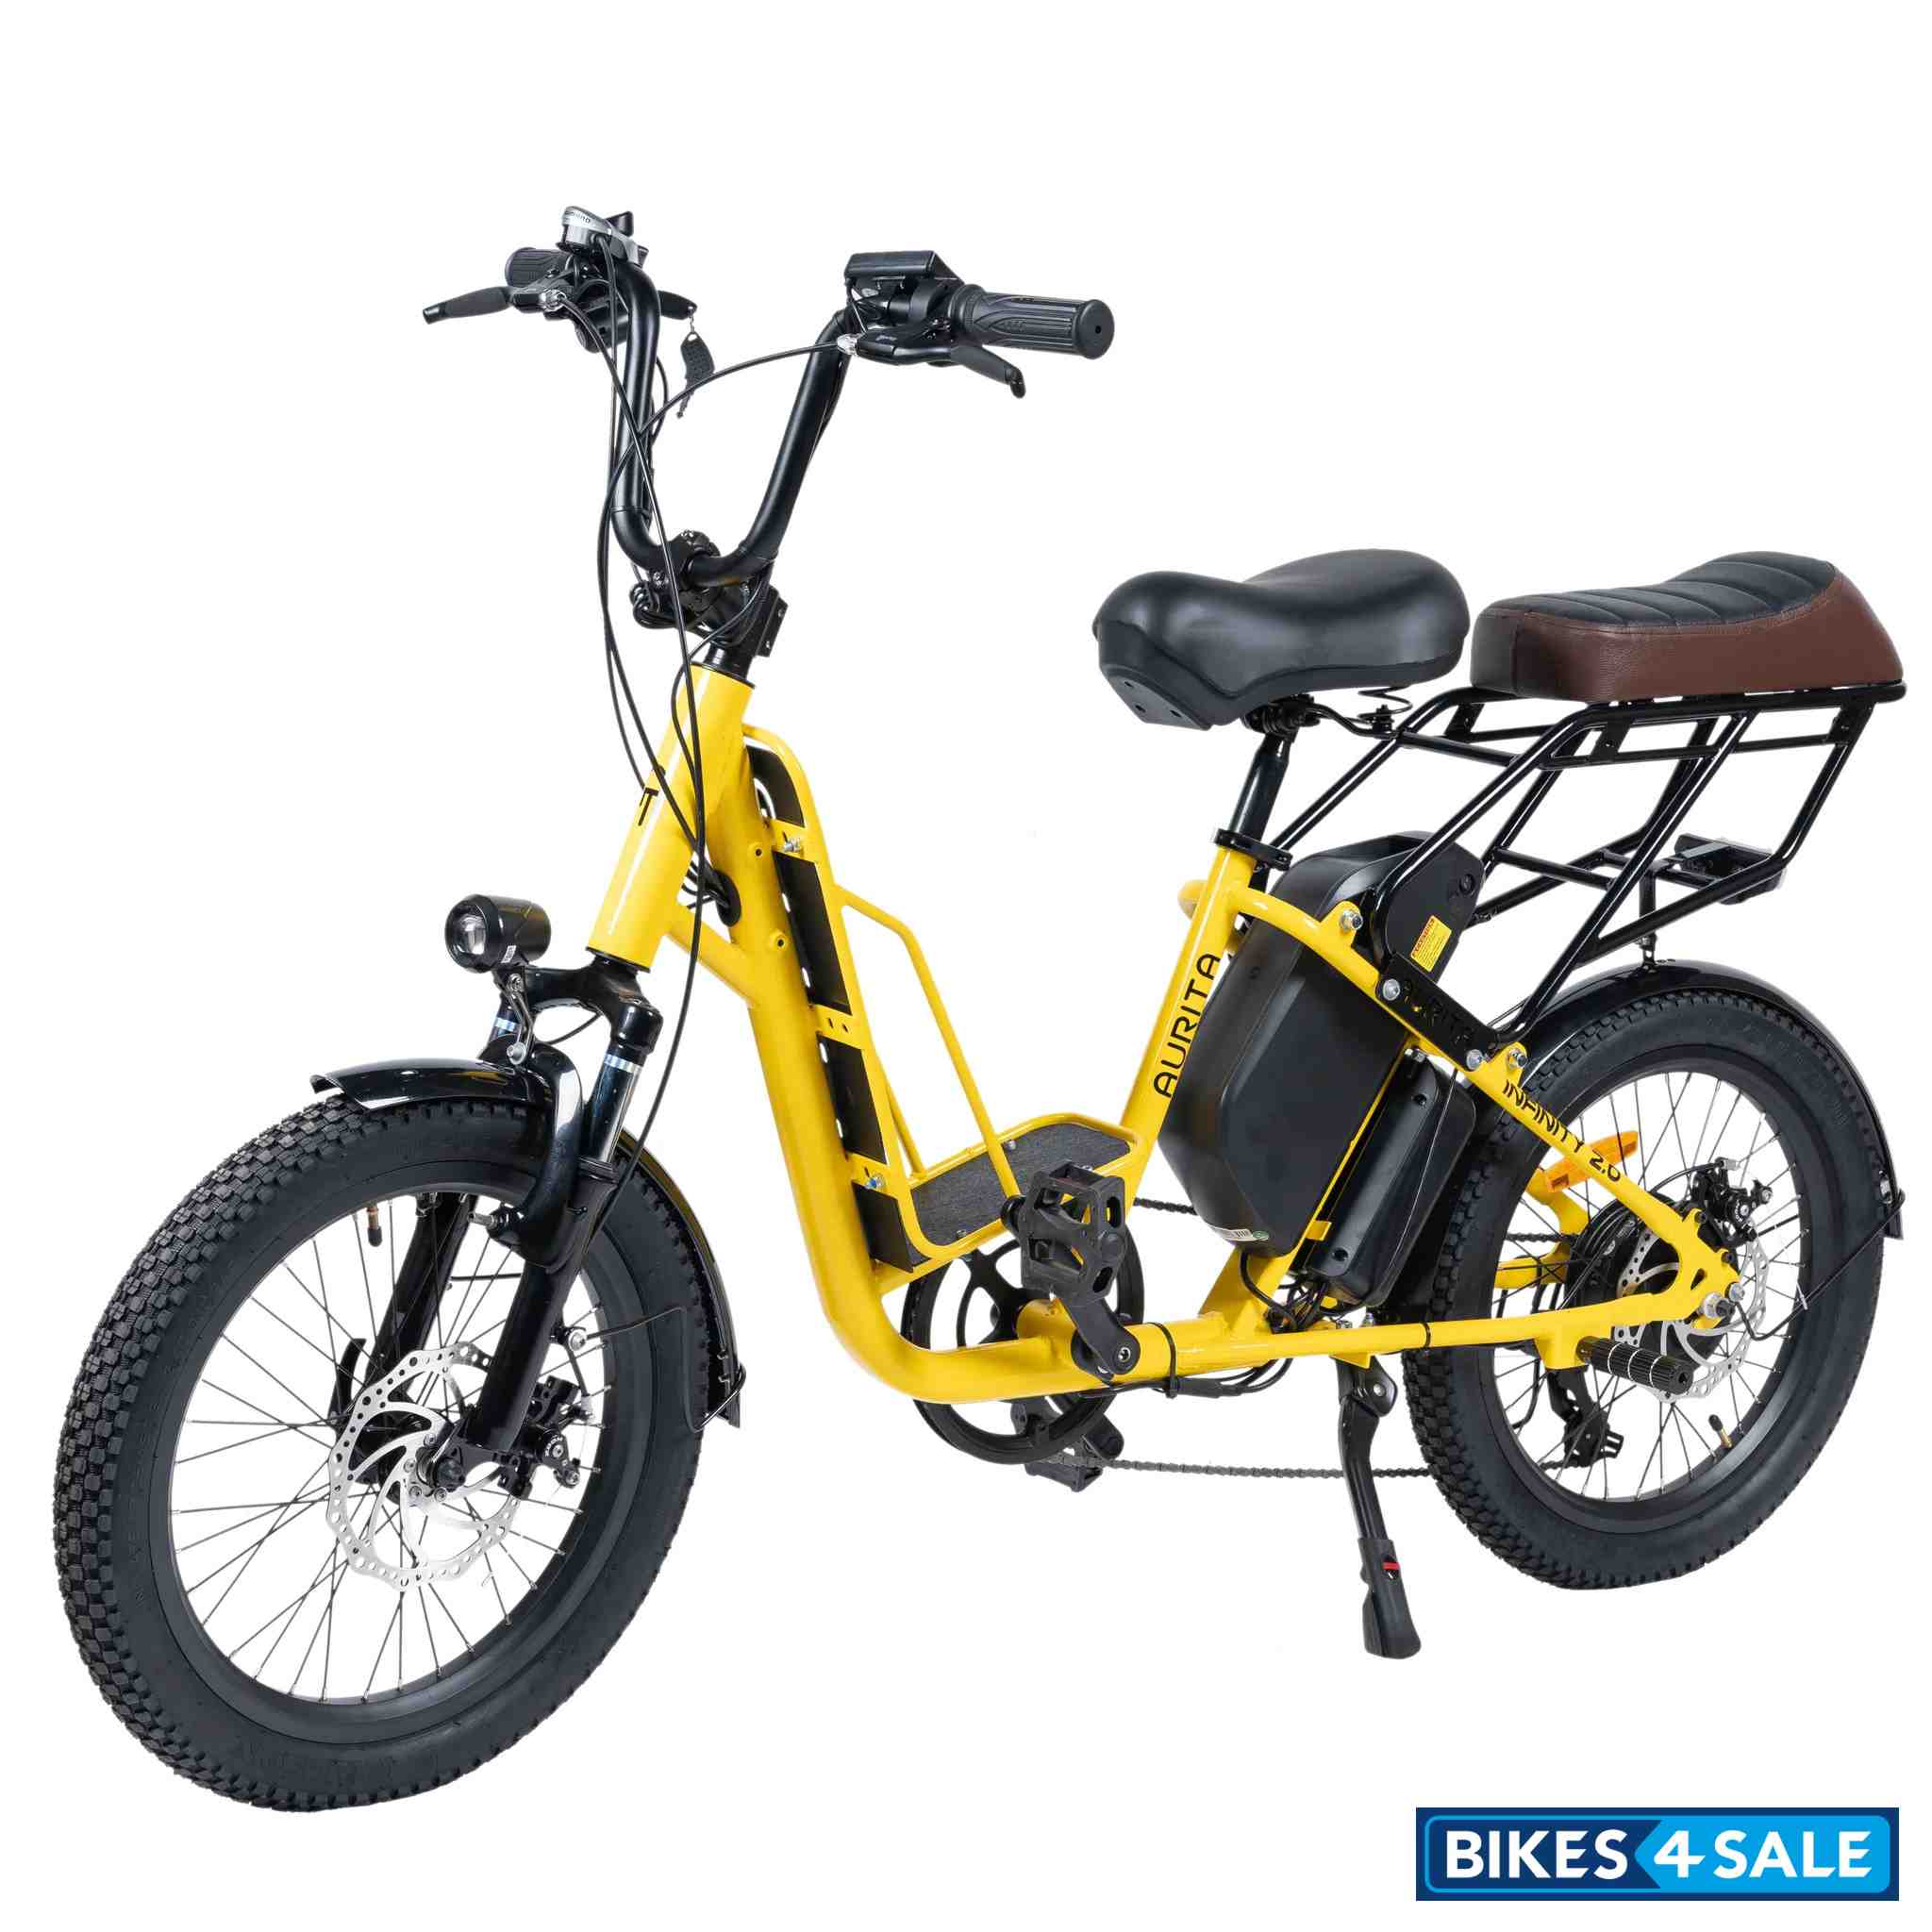 Aurita Typhoon Electric Bicycle price, colours, pictures, specs and ...